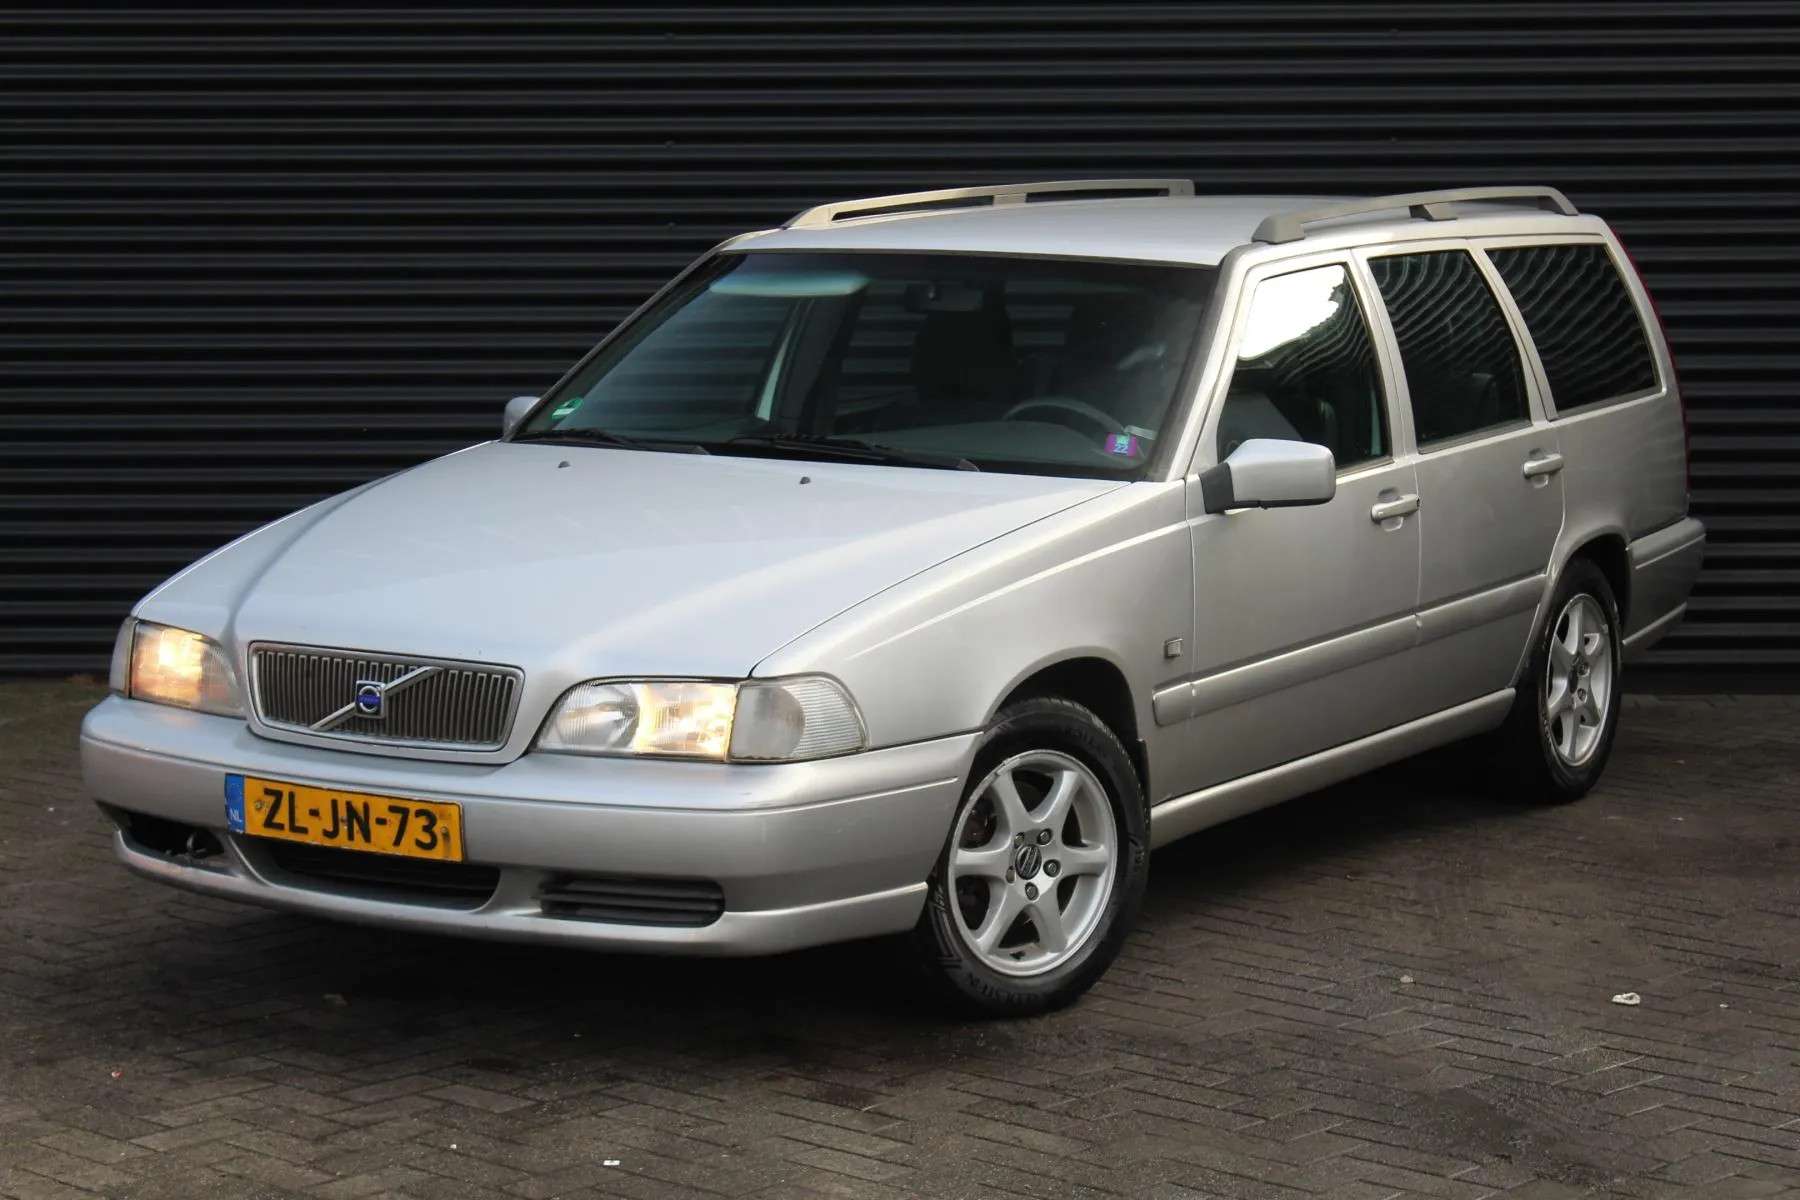 Volvo V70 Station wagon in Grey used in VOORTHUIZEN for € 1,450.-